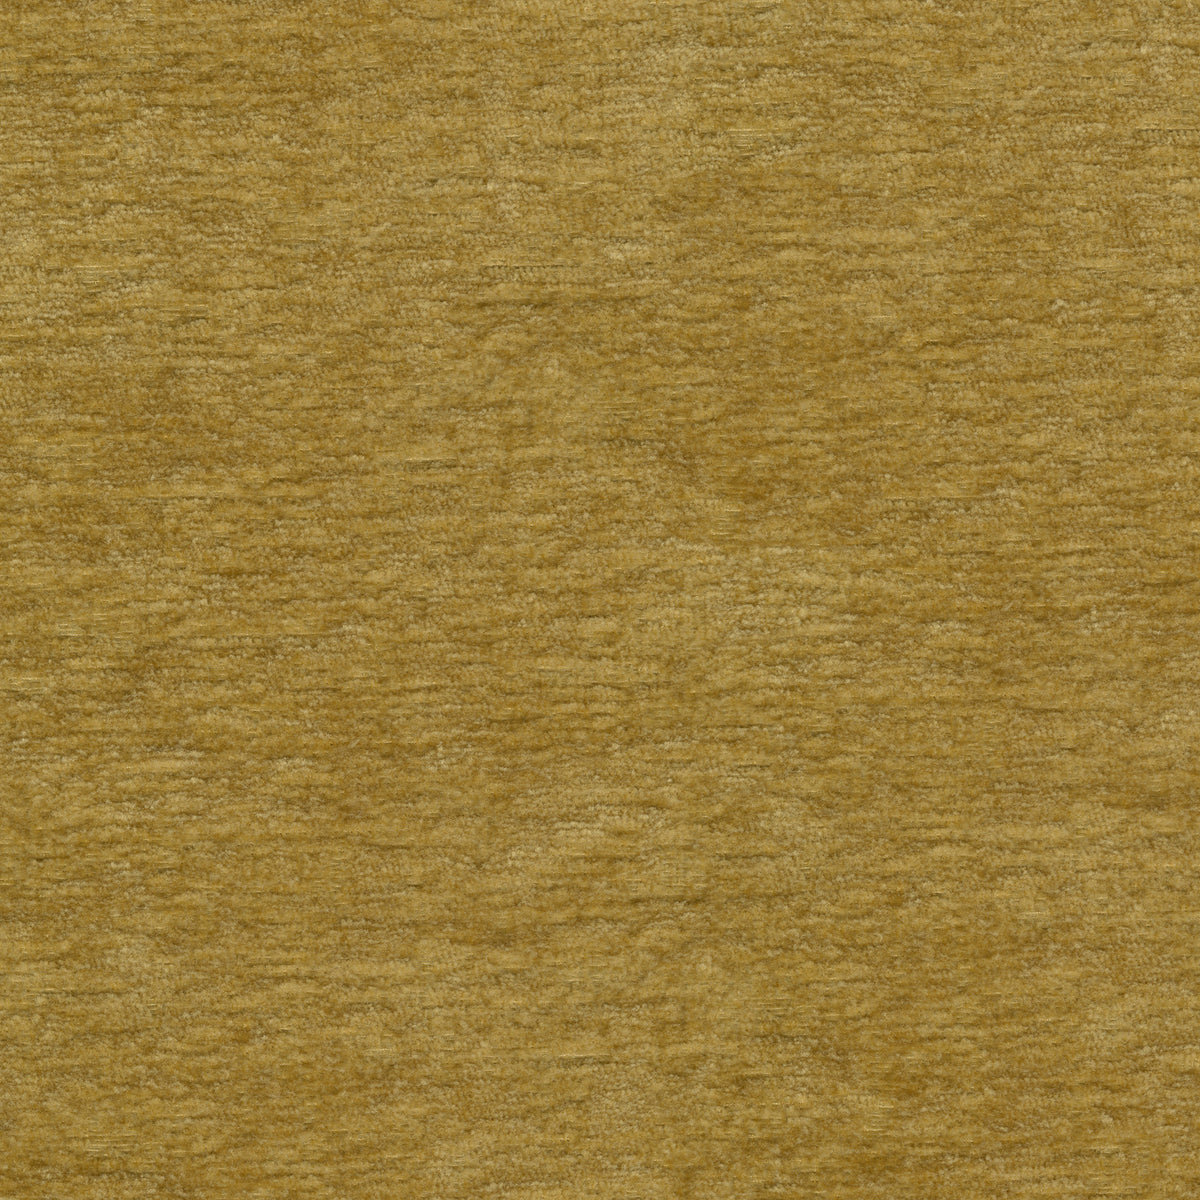 P/K Lifestyles Lushscape - Gold 412293 Upholstery Fabric